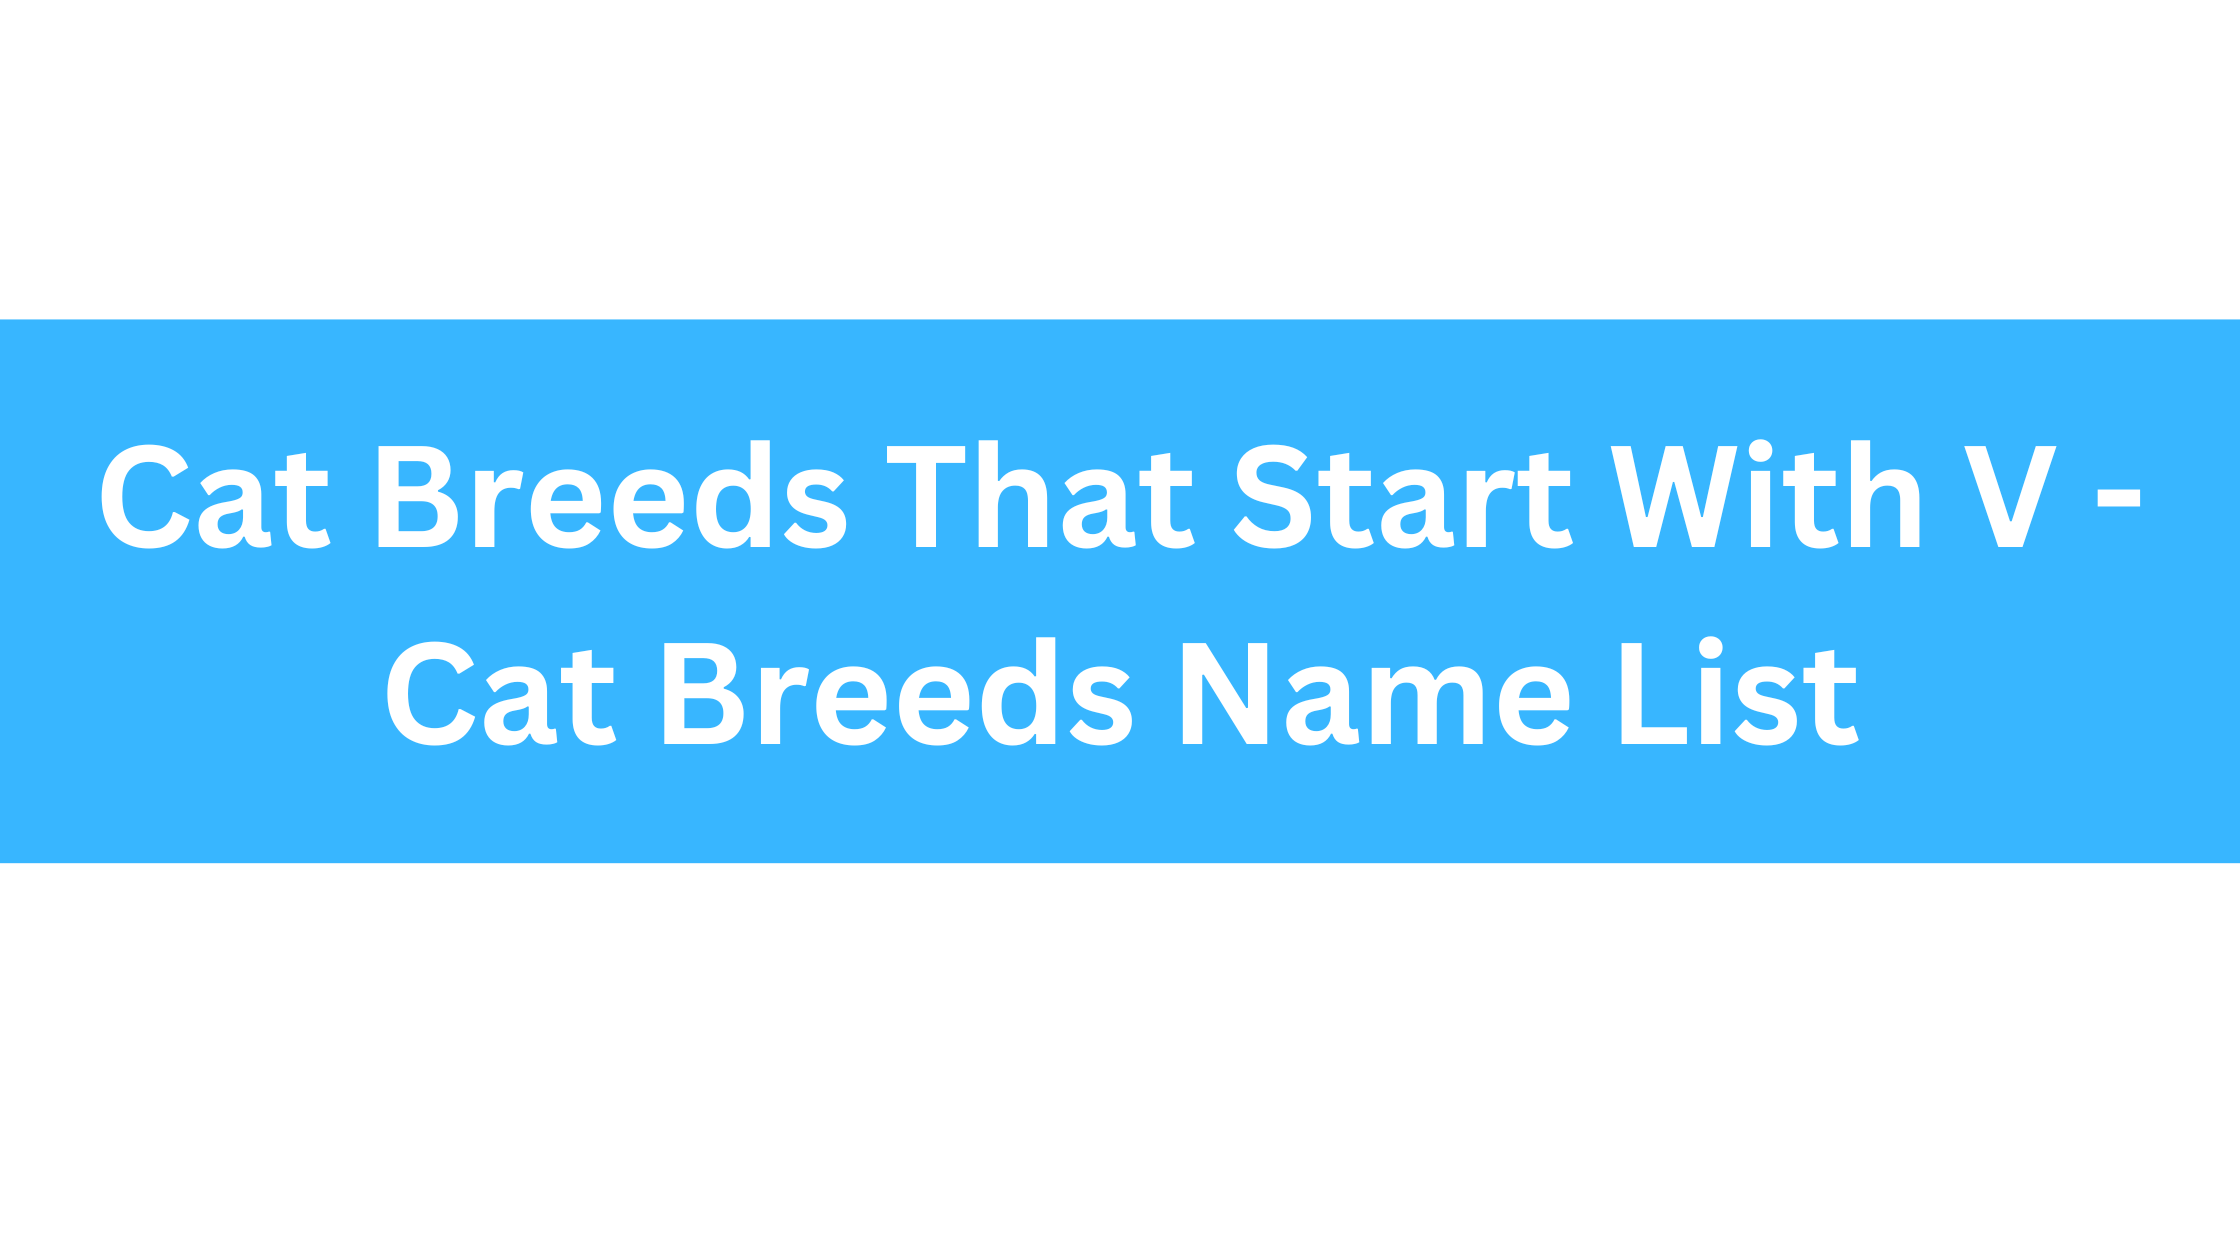 Cat Breeds That Start With V